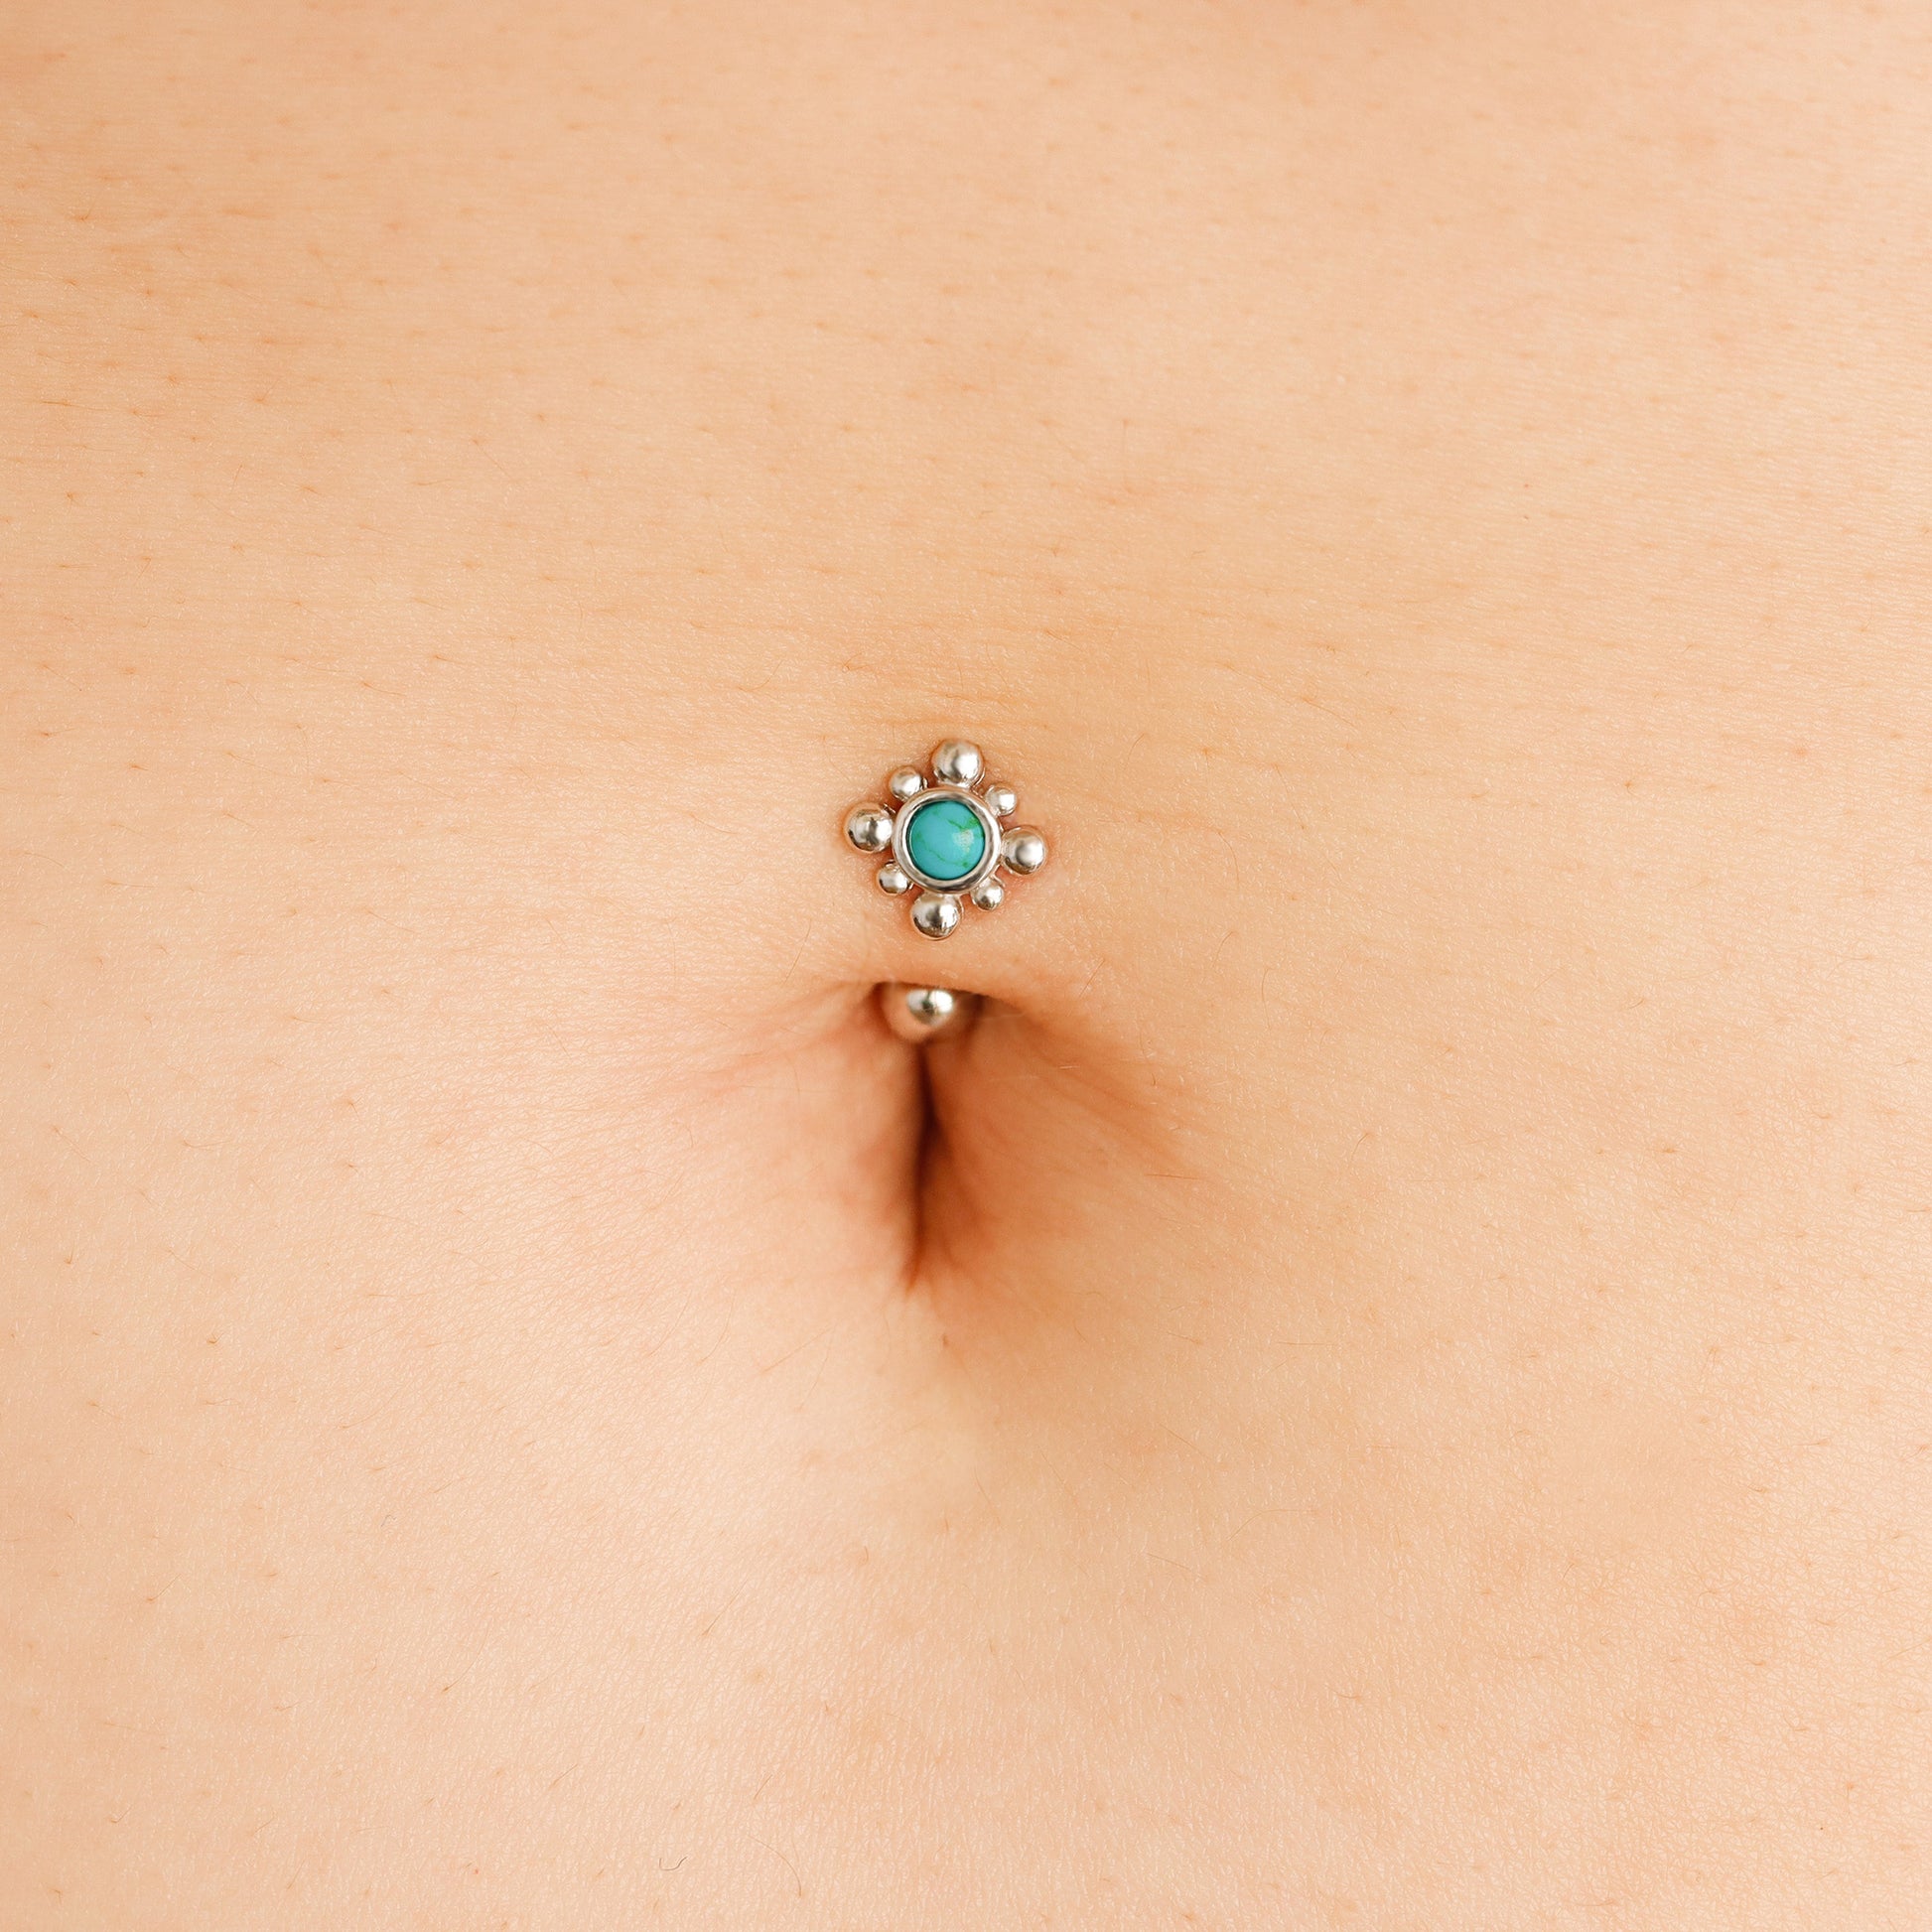 Solid 925 Silver | 14G Petite Sun Turquoise Reverse Belly Ring | 6mm 1/4" 8mm 5/16" 10mm 3/8" - Sturdy South